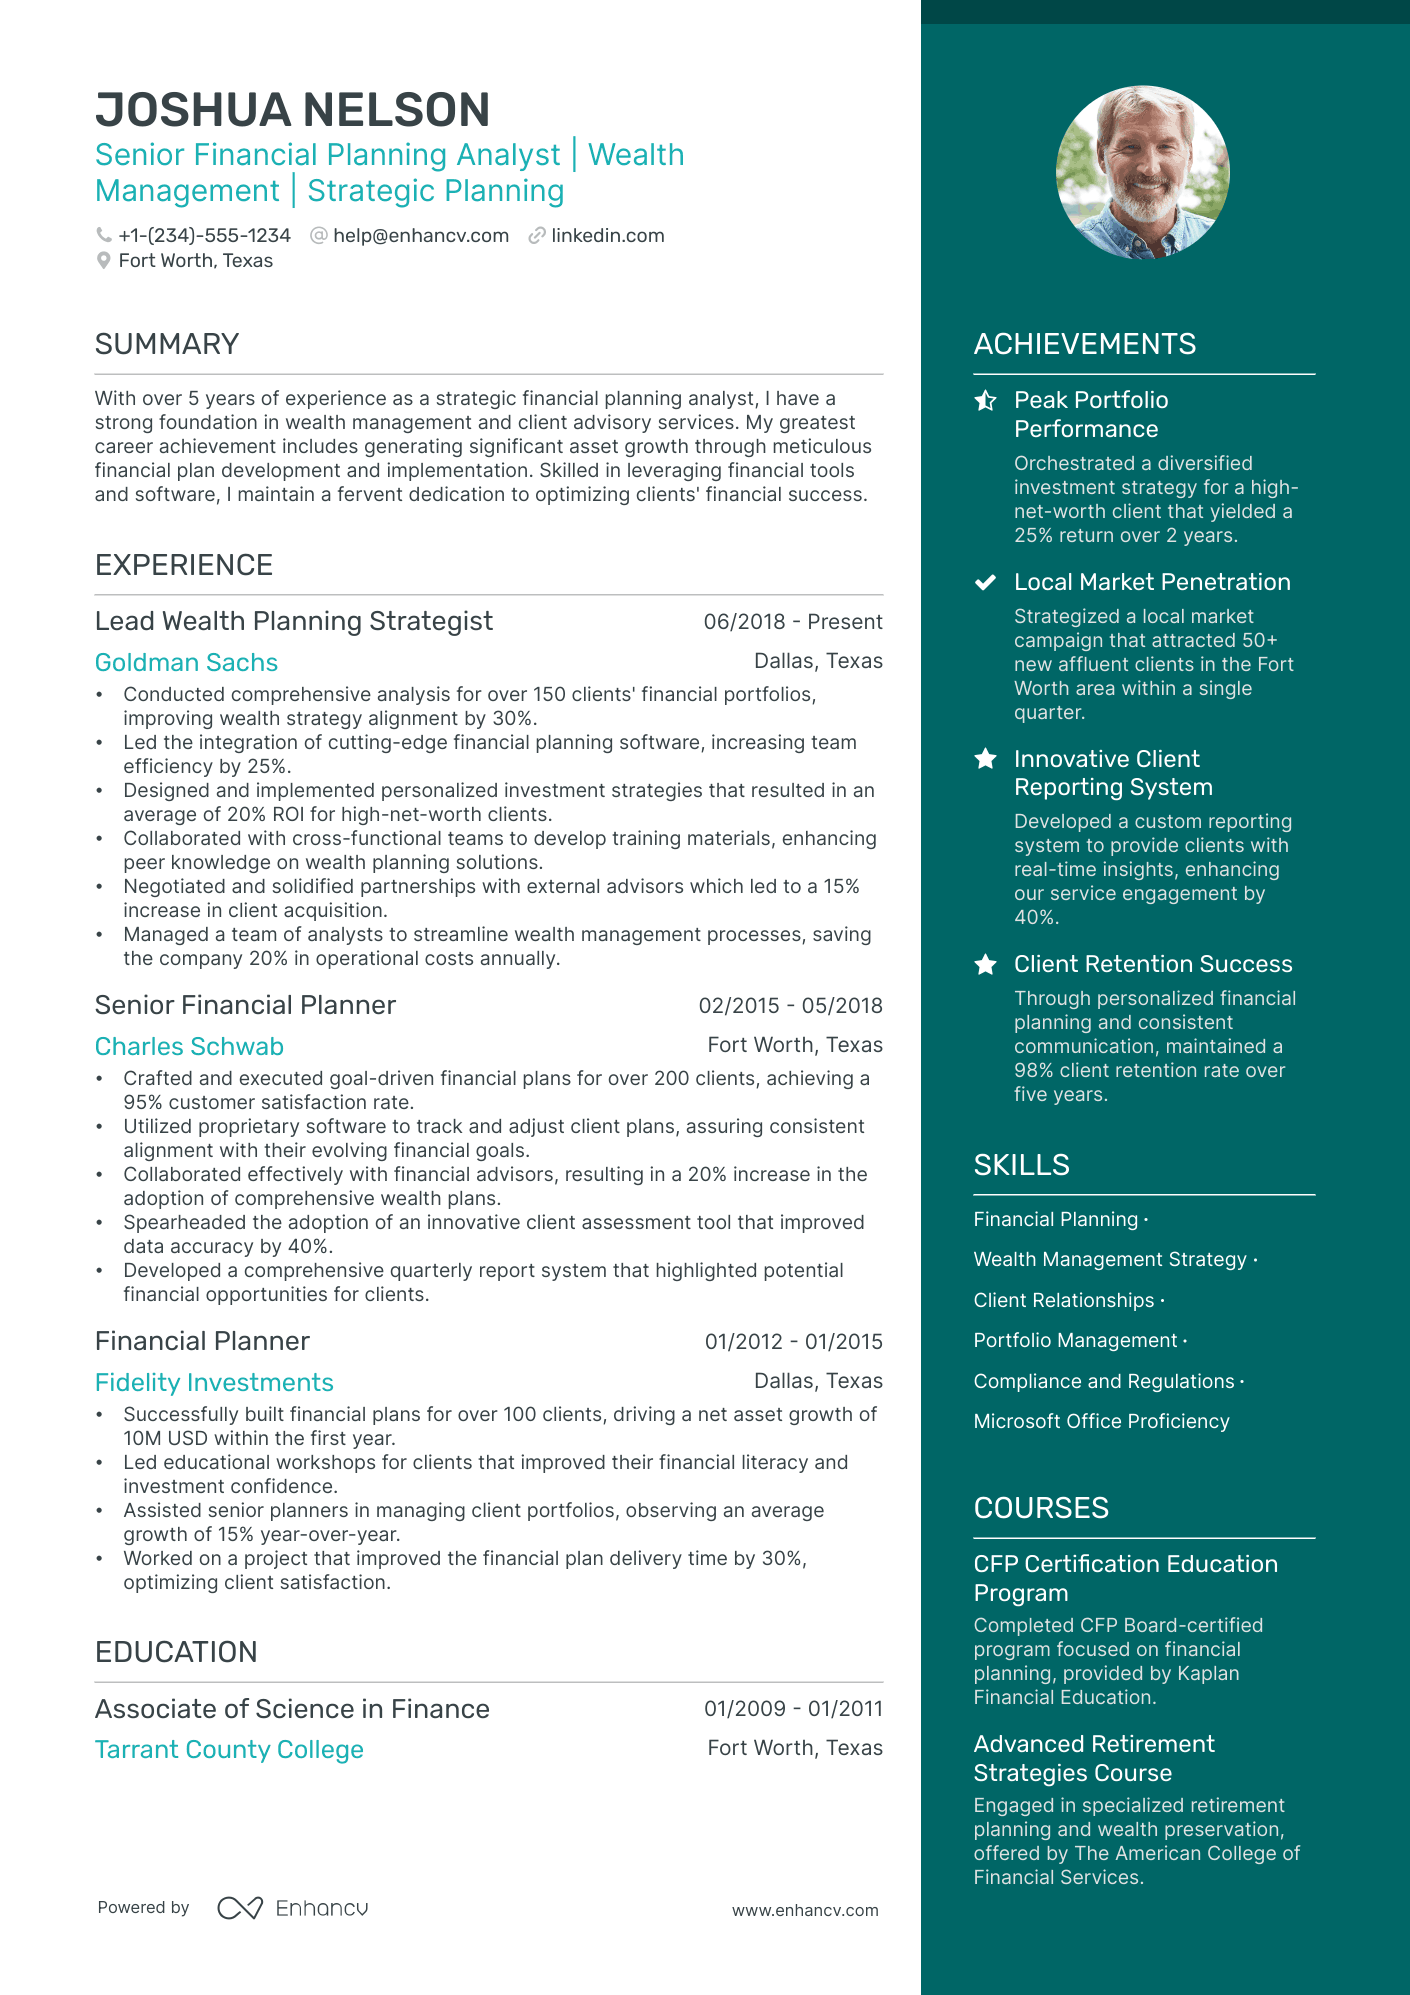 manager of financial planning and analysis resume